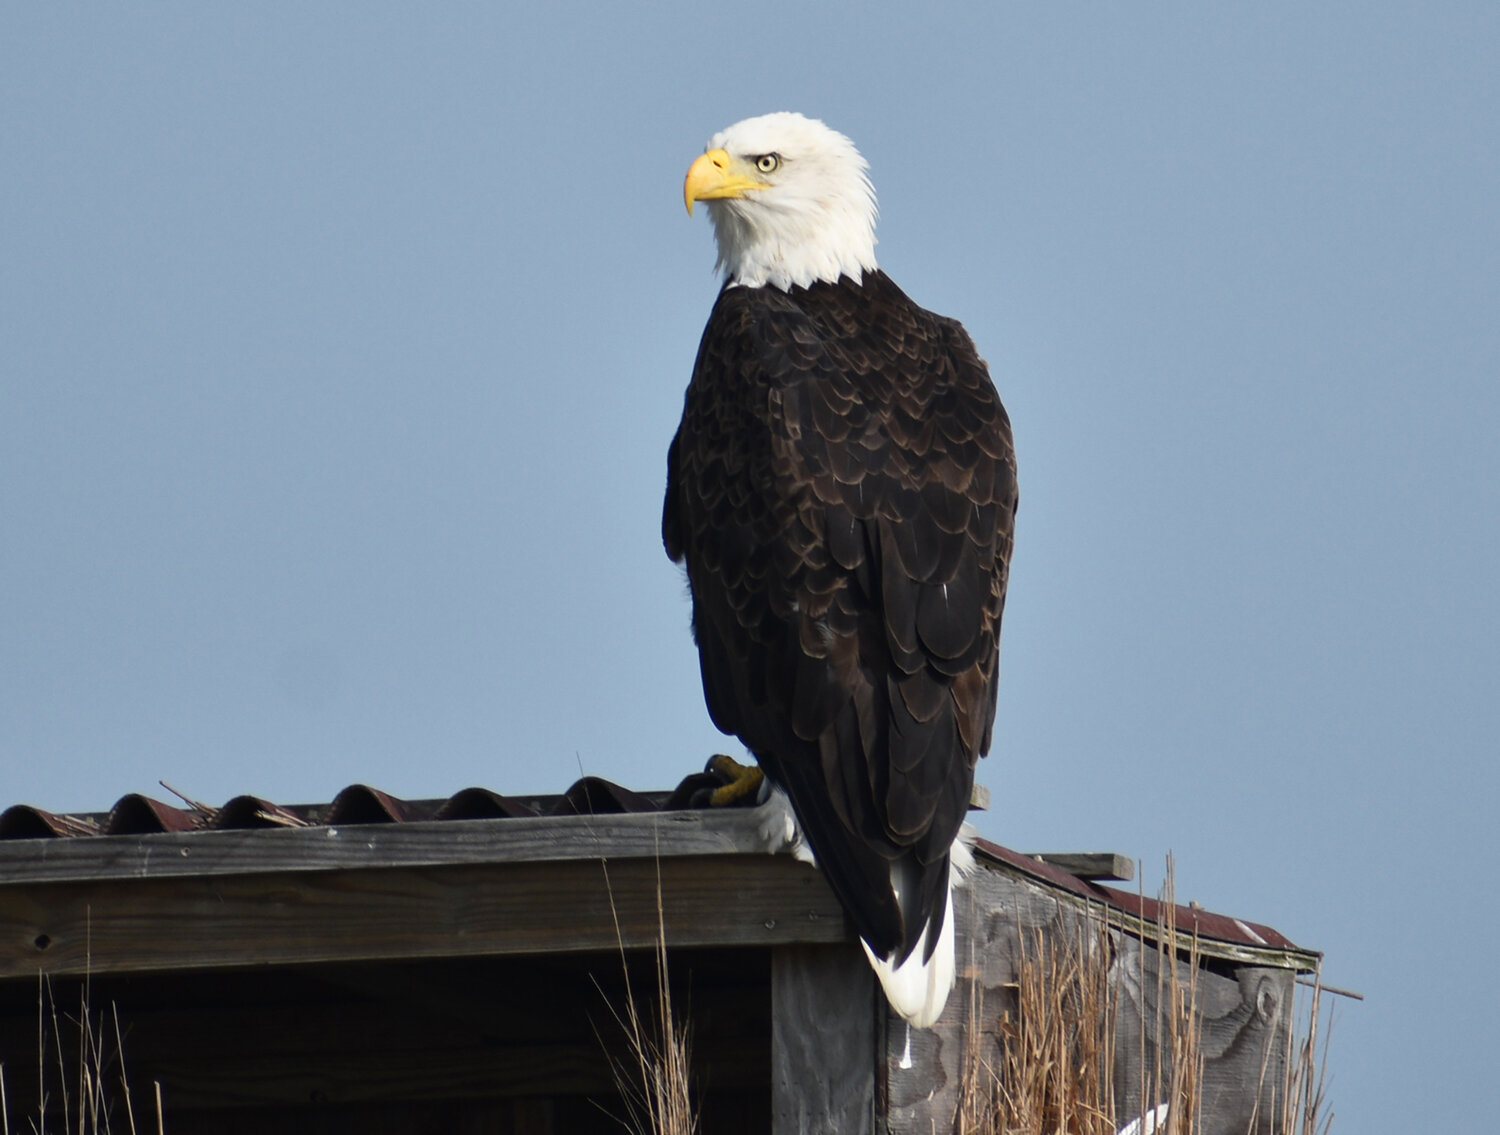 We saw this eagle on the Broadkill River this past Saturday afternoon scoping out his flooded hunting grounds and us.